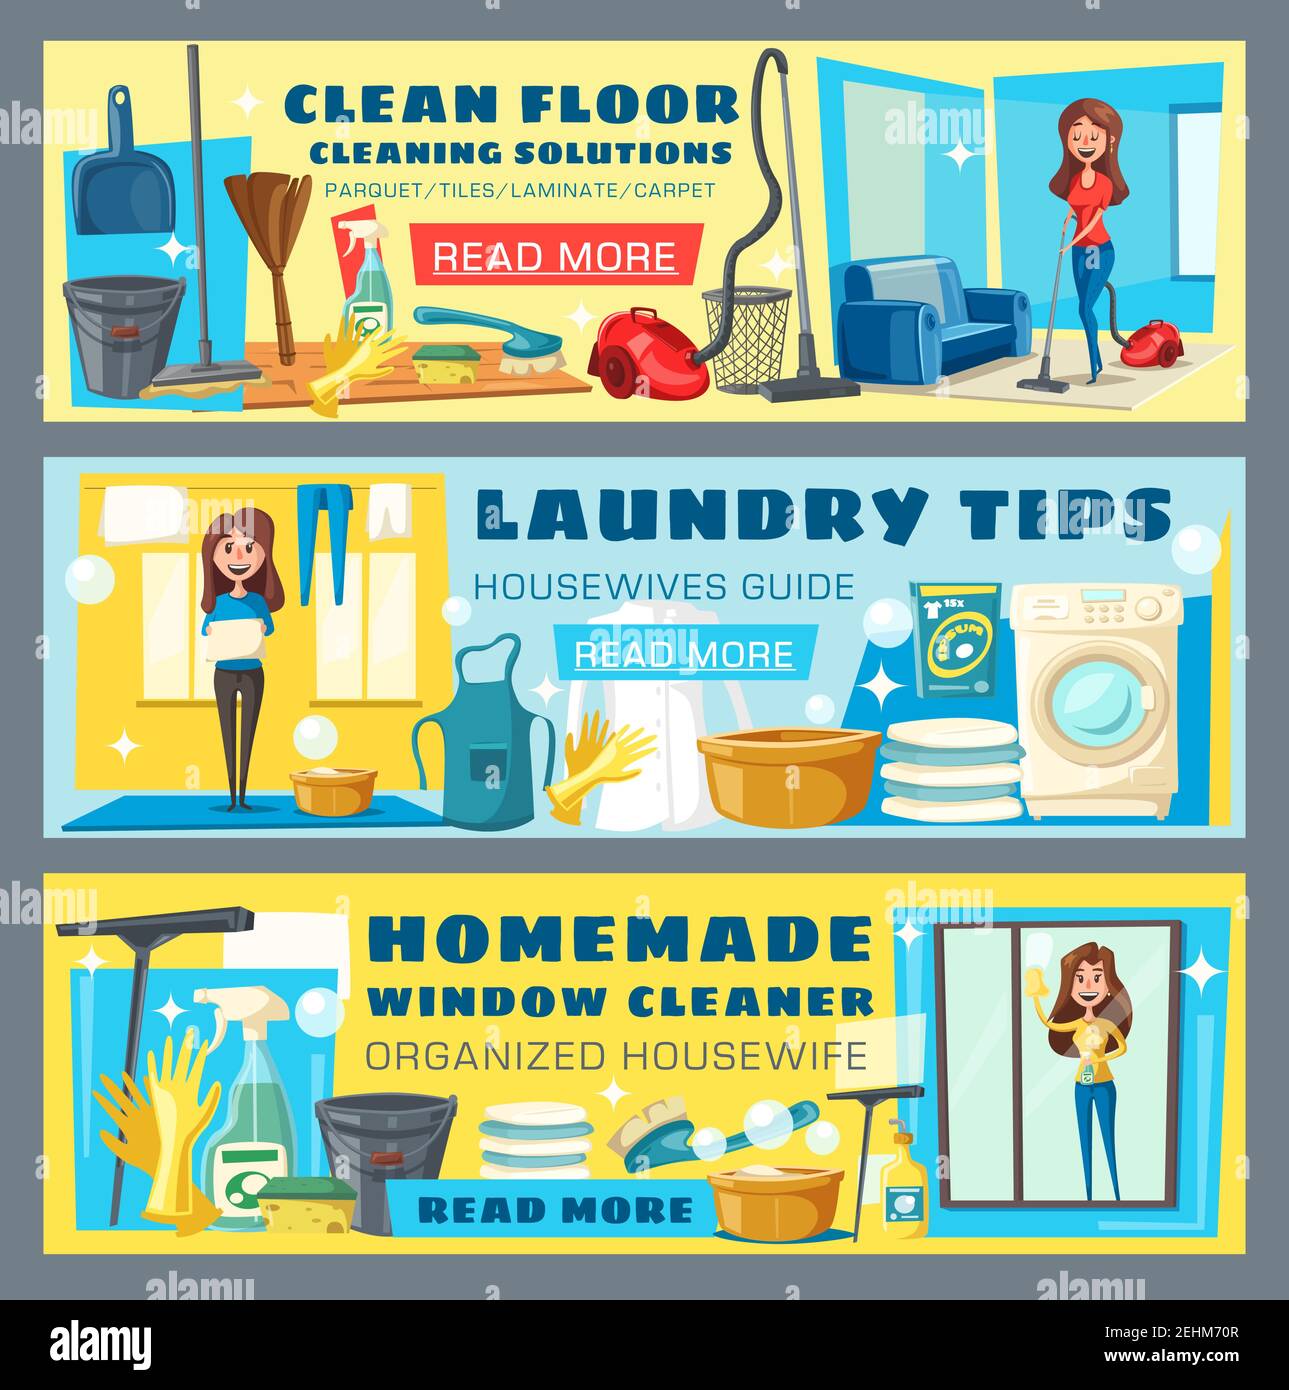 https://c8.alamy.com/comp/2EHM70R/clean-floor-and-laundry-tips-homemade-window-polishing-cartoon-banners-advice-for-housewife-to-maintain-house-woman-with-buckets-and-brushes-for-mo-2EHM70R.jpg